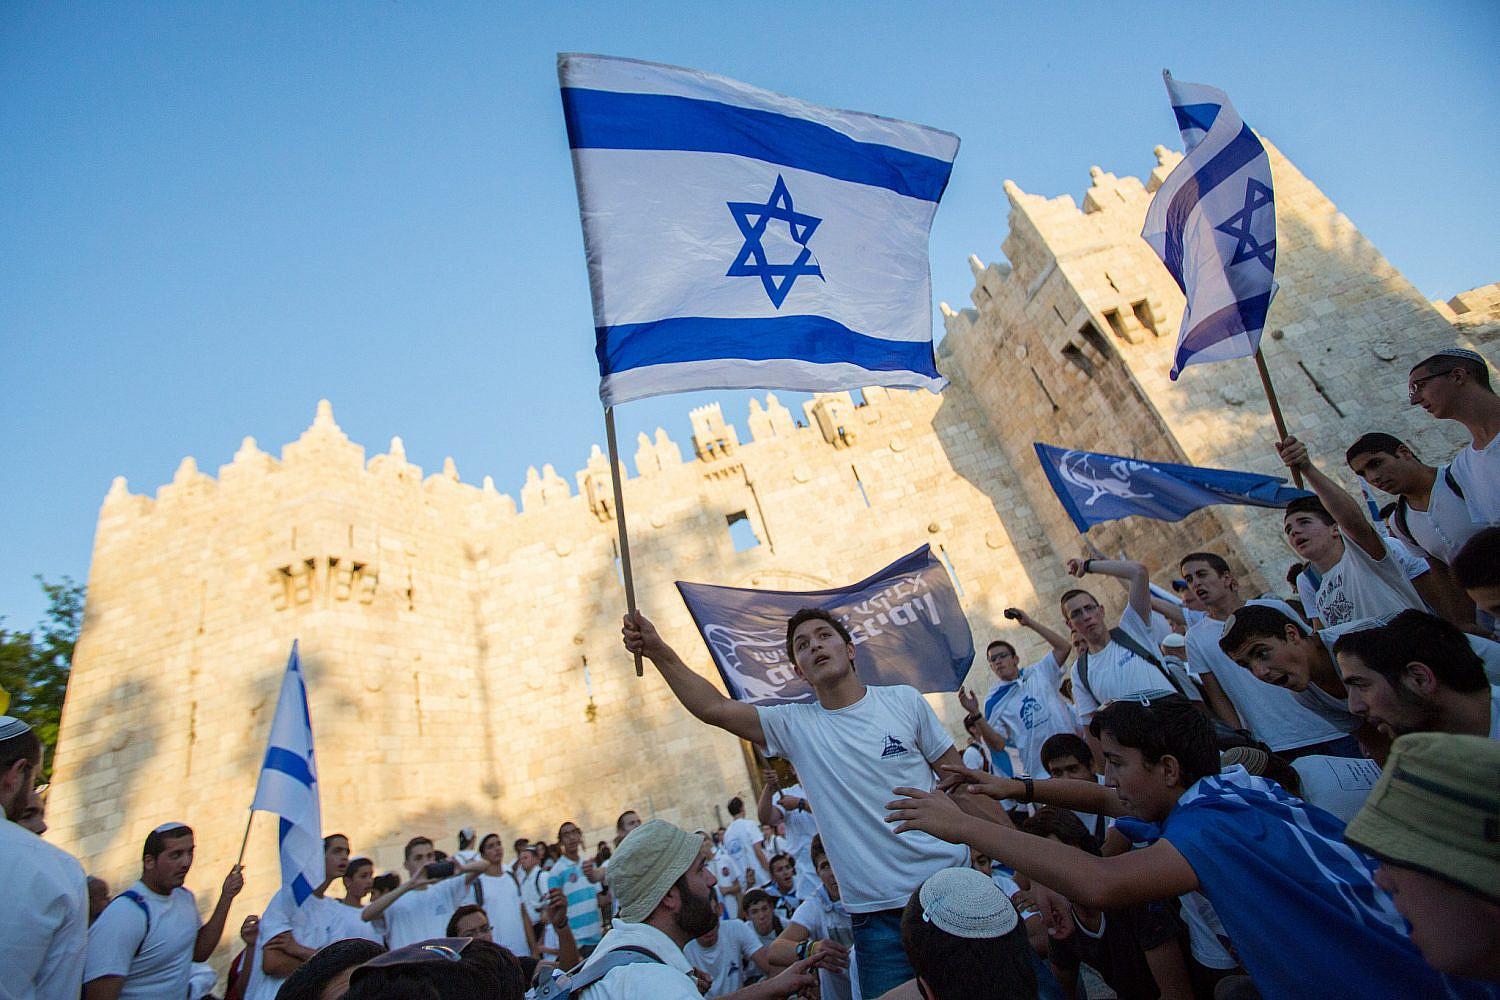 Thousands of young Jewish boys wave Israeli flags as they celebrate Jerusalem Day, dancing and marching their way through Damascus Gate to the Western Wall, May 17, 2015. (Yonatan Sindel/Flash90)